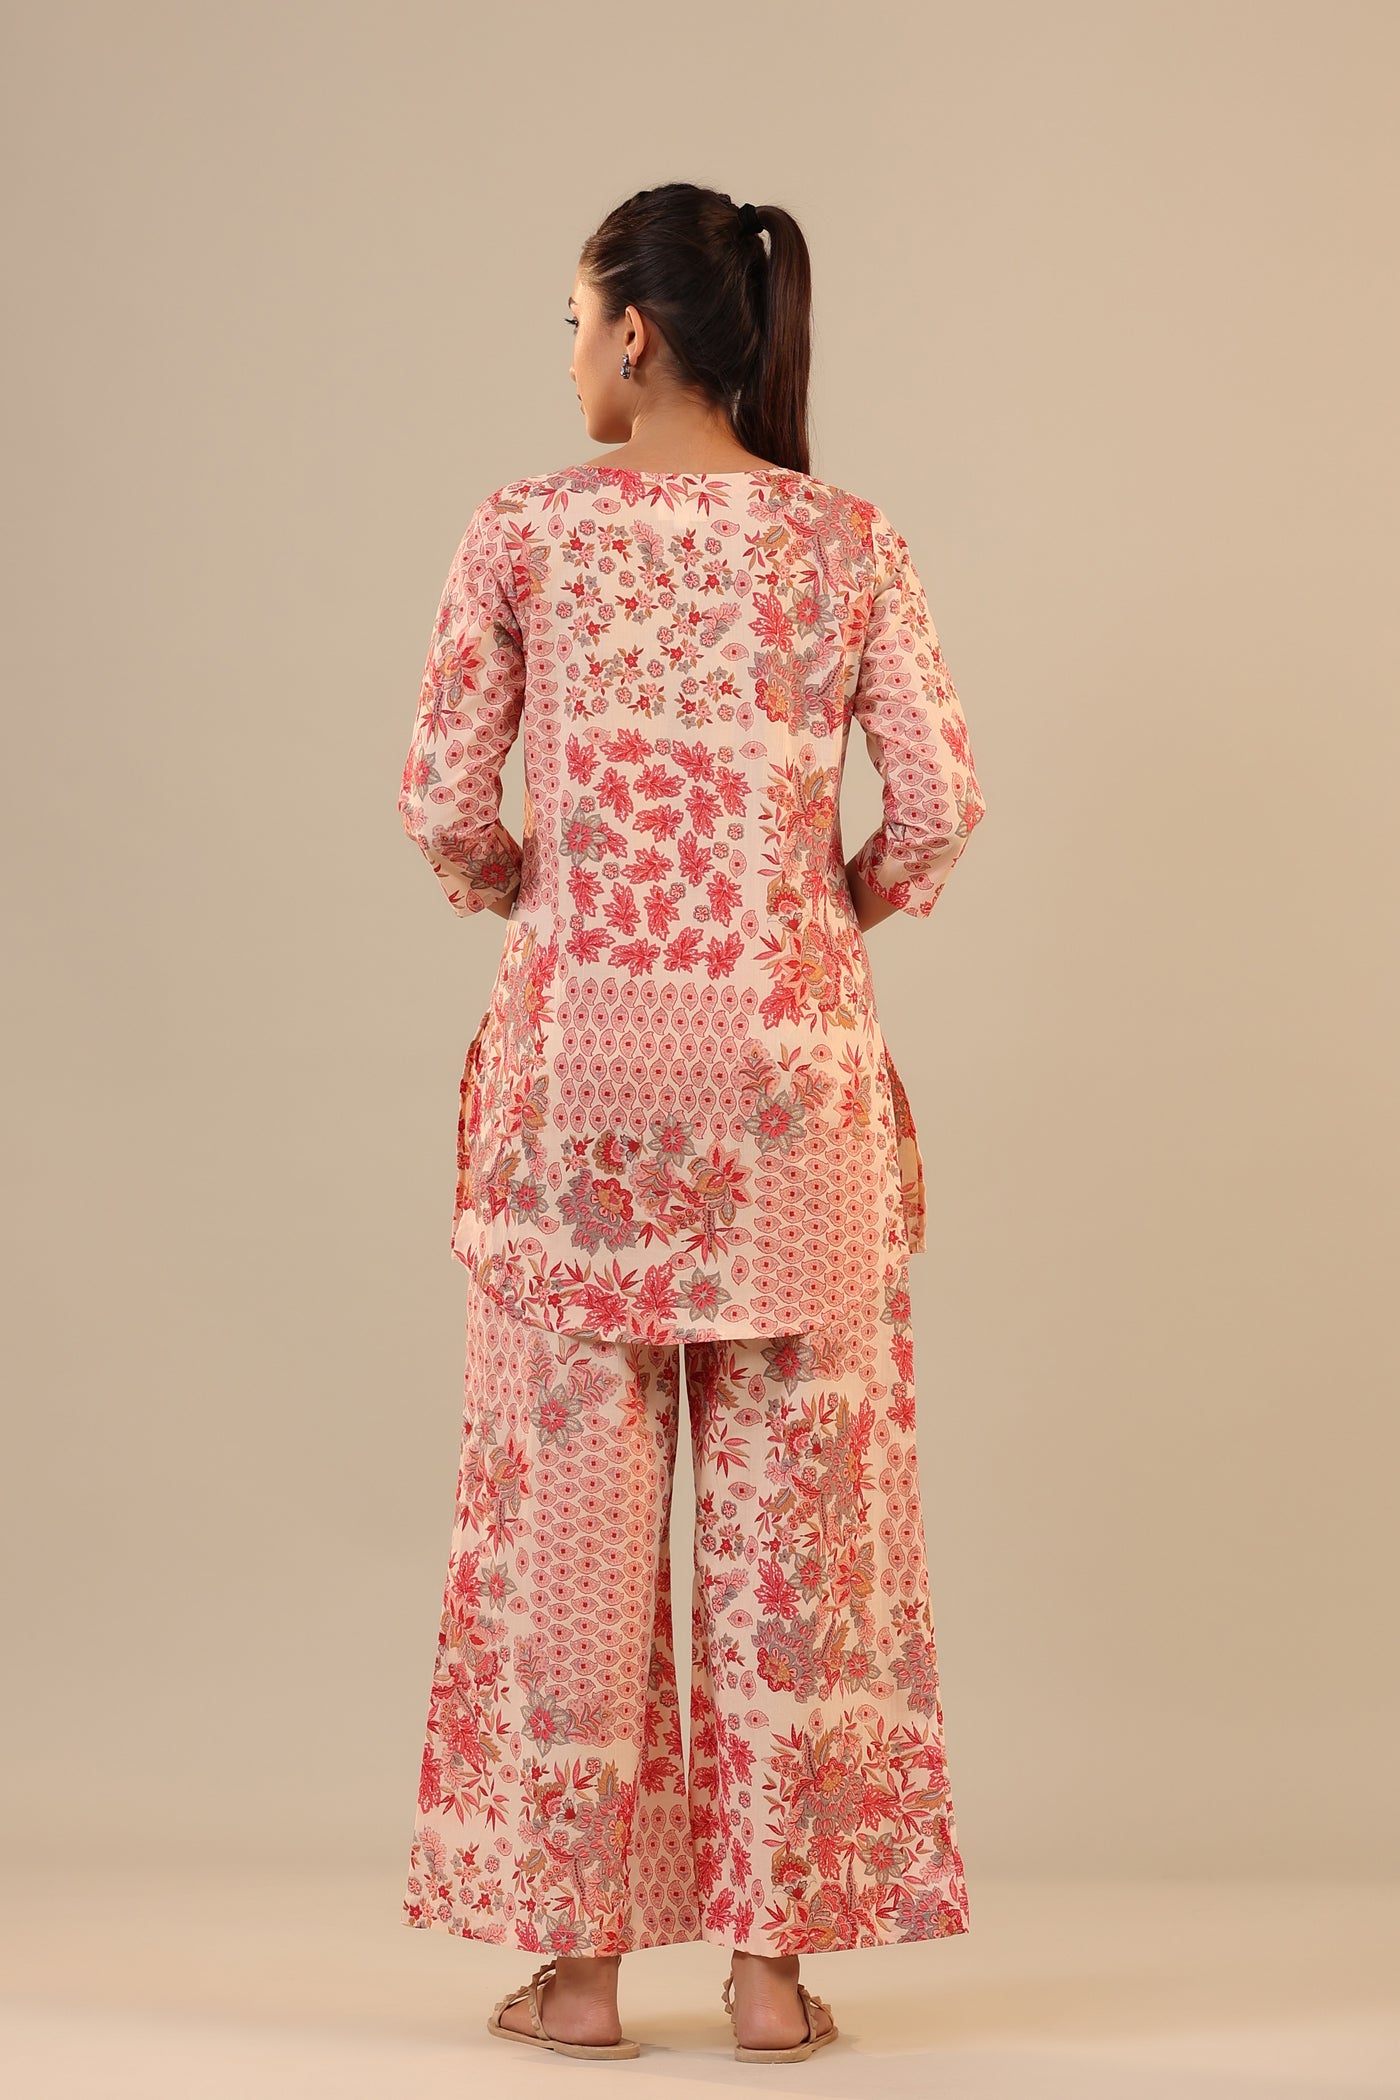 Patterned Florals on off white Loungewear Palazzo Set